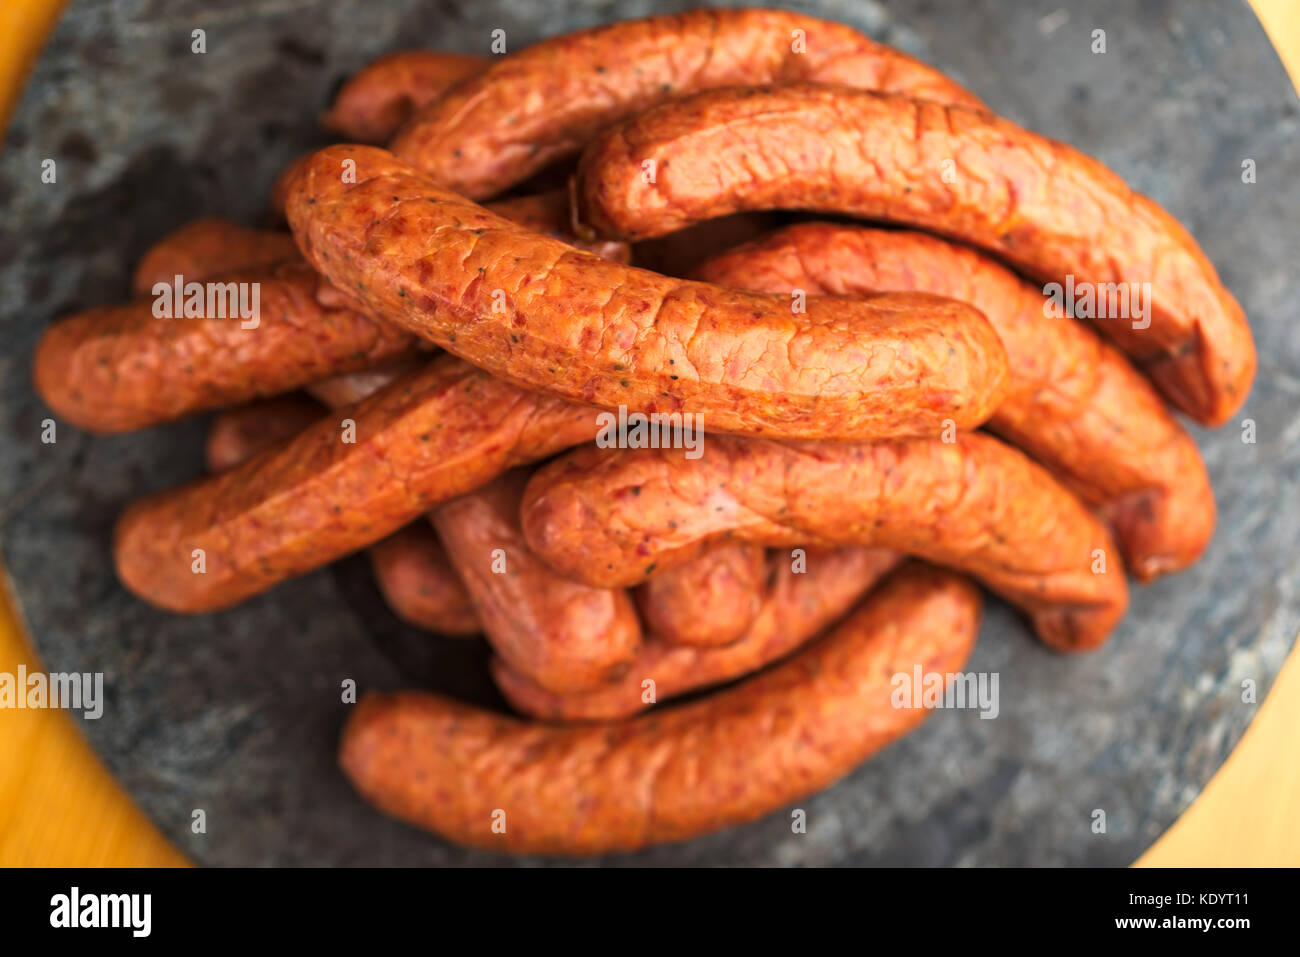 Large pile of deliciously smoked handmade Swedish Isterband sausages with natural casing. Stock Photo